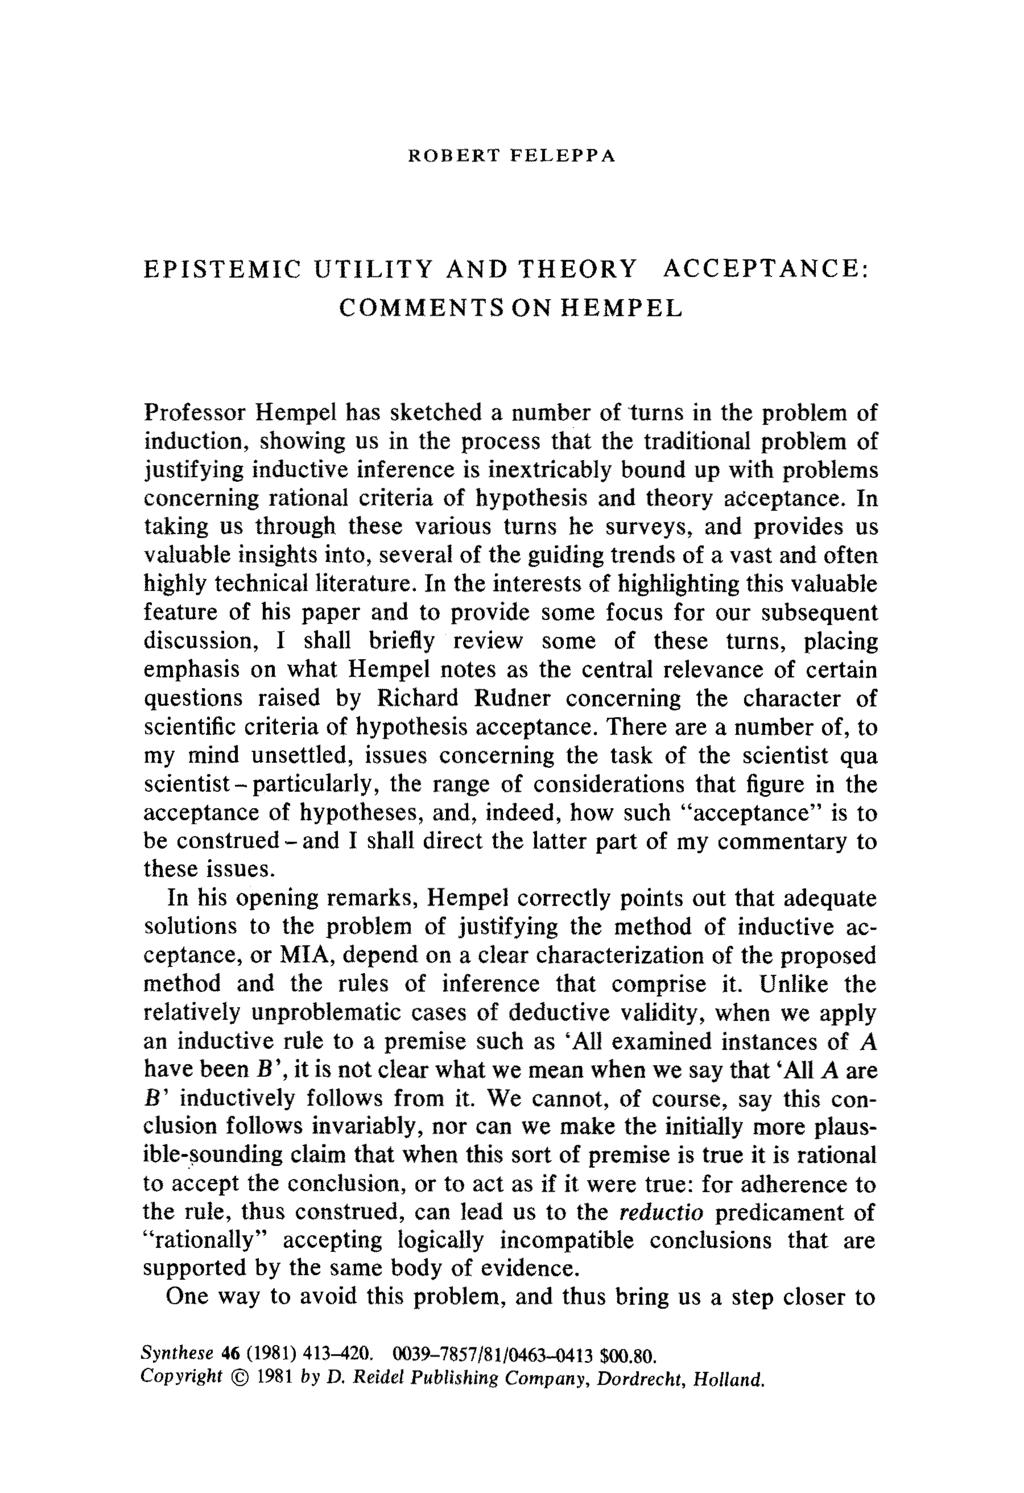 ROBERT FELEPPA EPISTEMIC UTILITY AND THEORY ACCEPTANCE: COMMENTS ON HEMPEL Professor Hempel has sketched a number of turns in the problem of induction, showing us in the process that the traditional